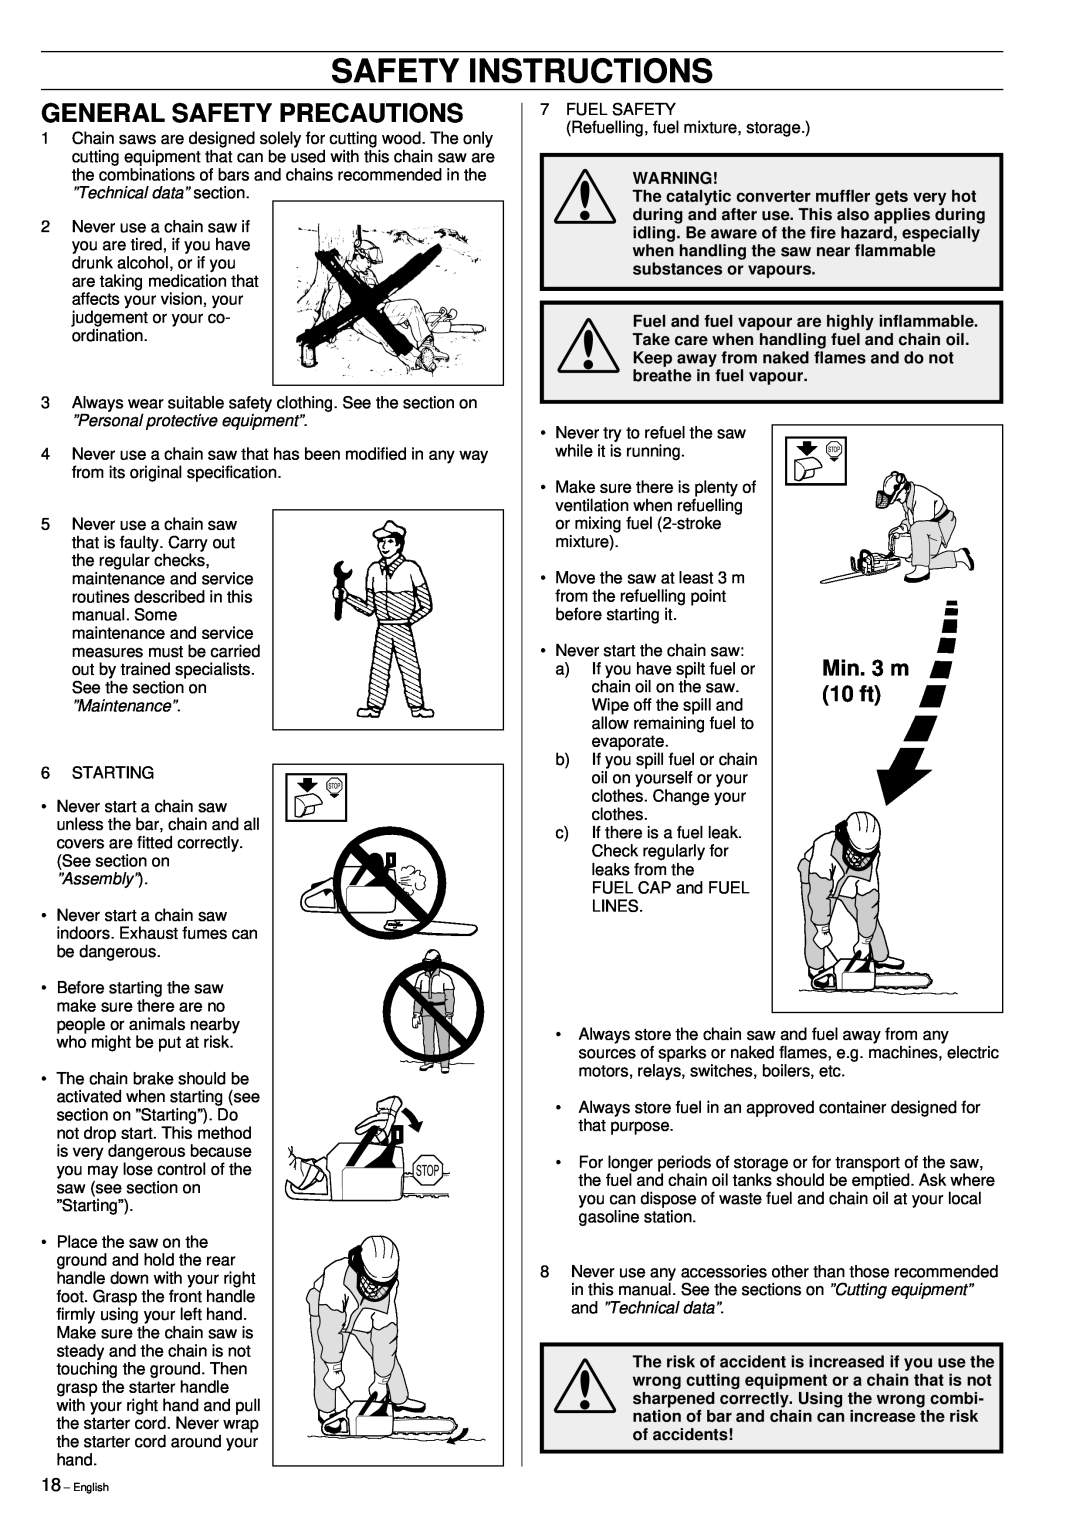 Jonsered 2159 manual General Safety Precautions, Min. 3 m, 10 ft, ”Technical data” section, ”Personal protective equipment” 